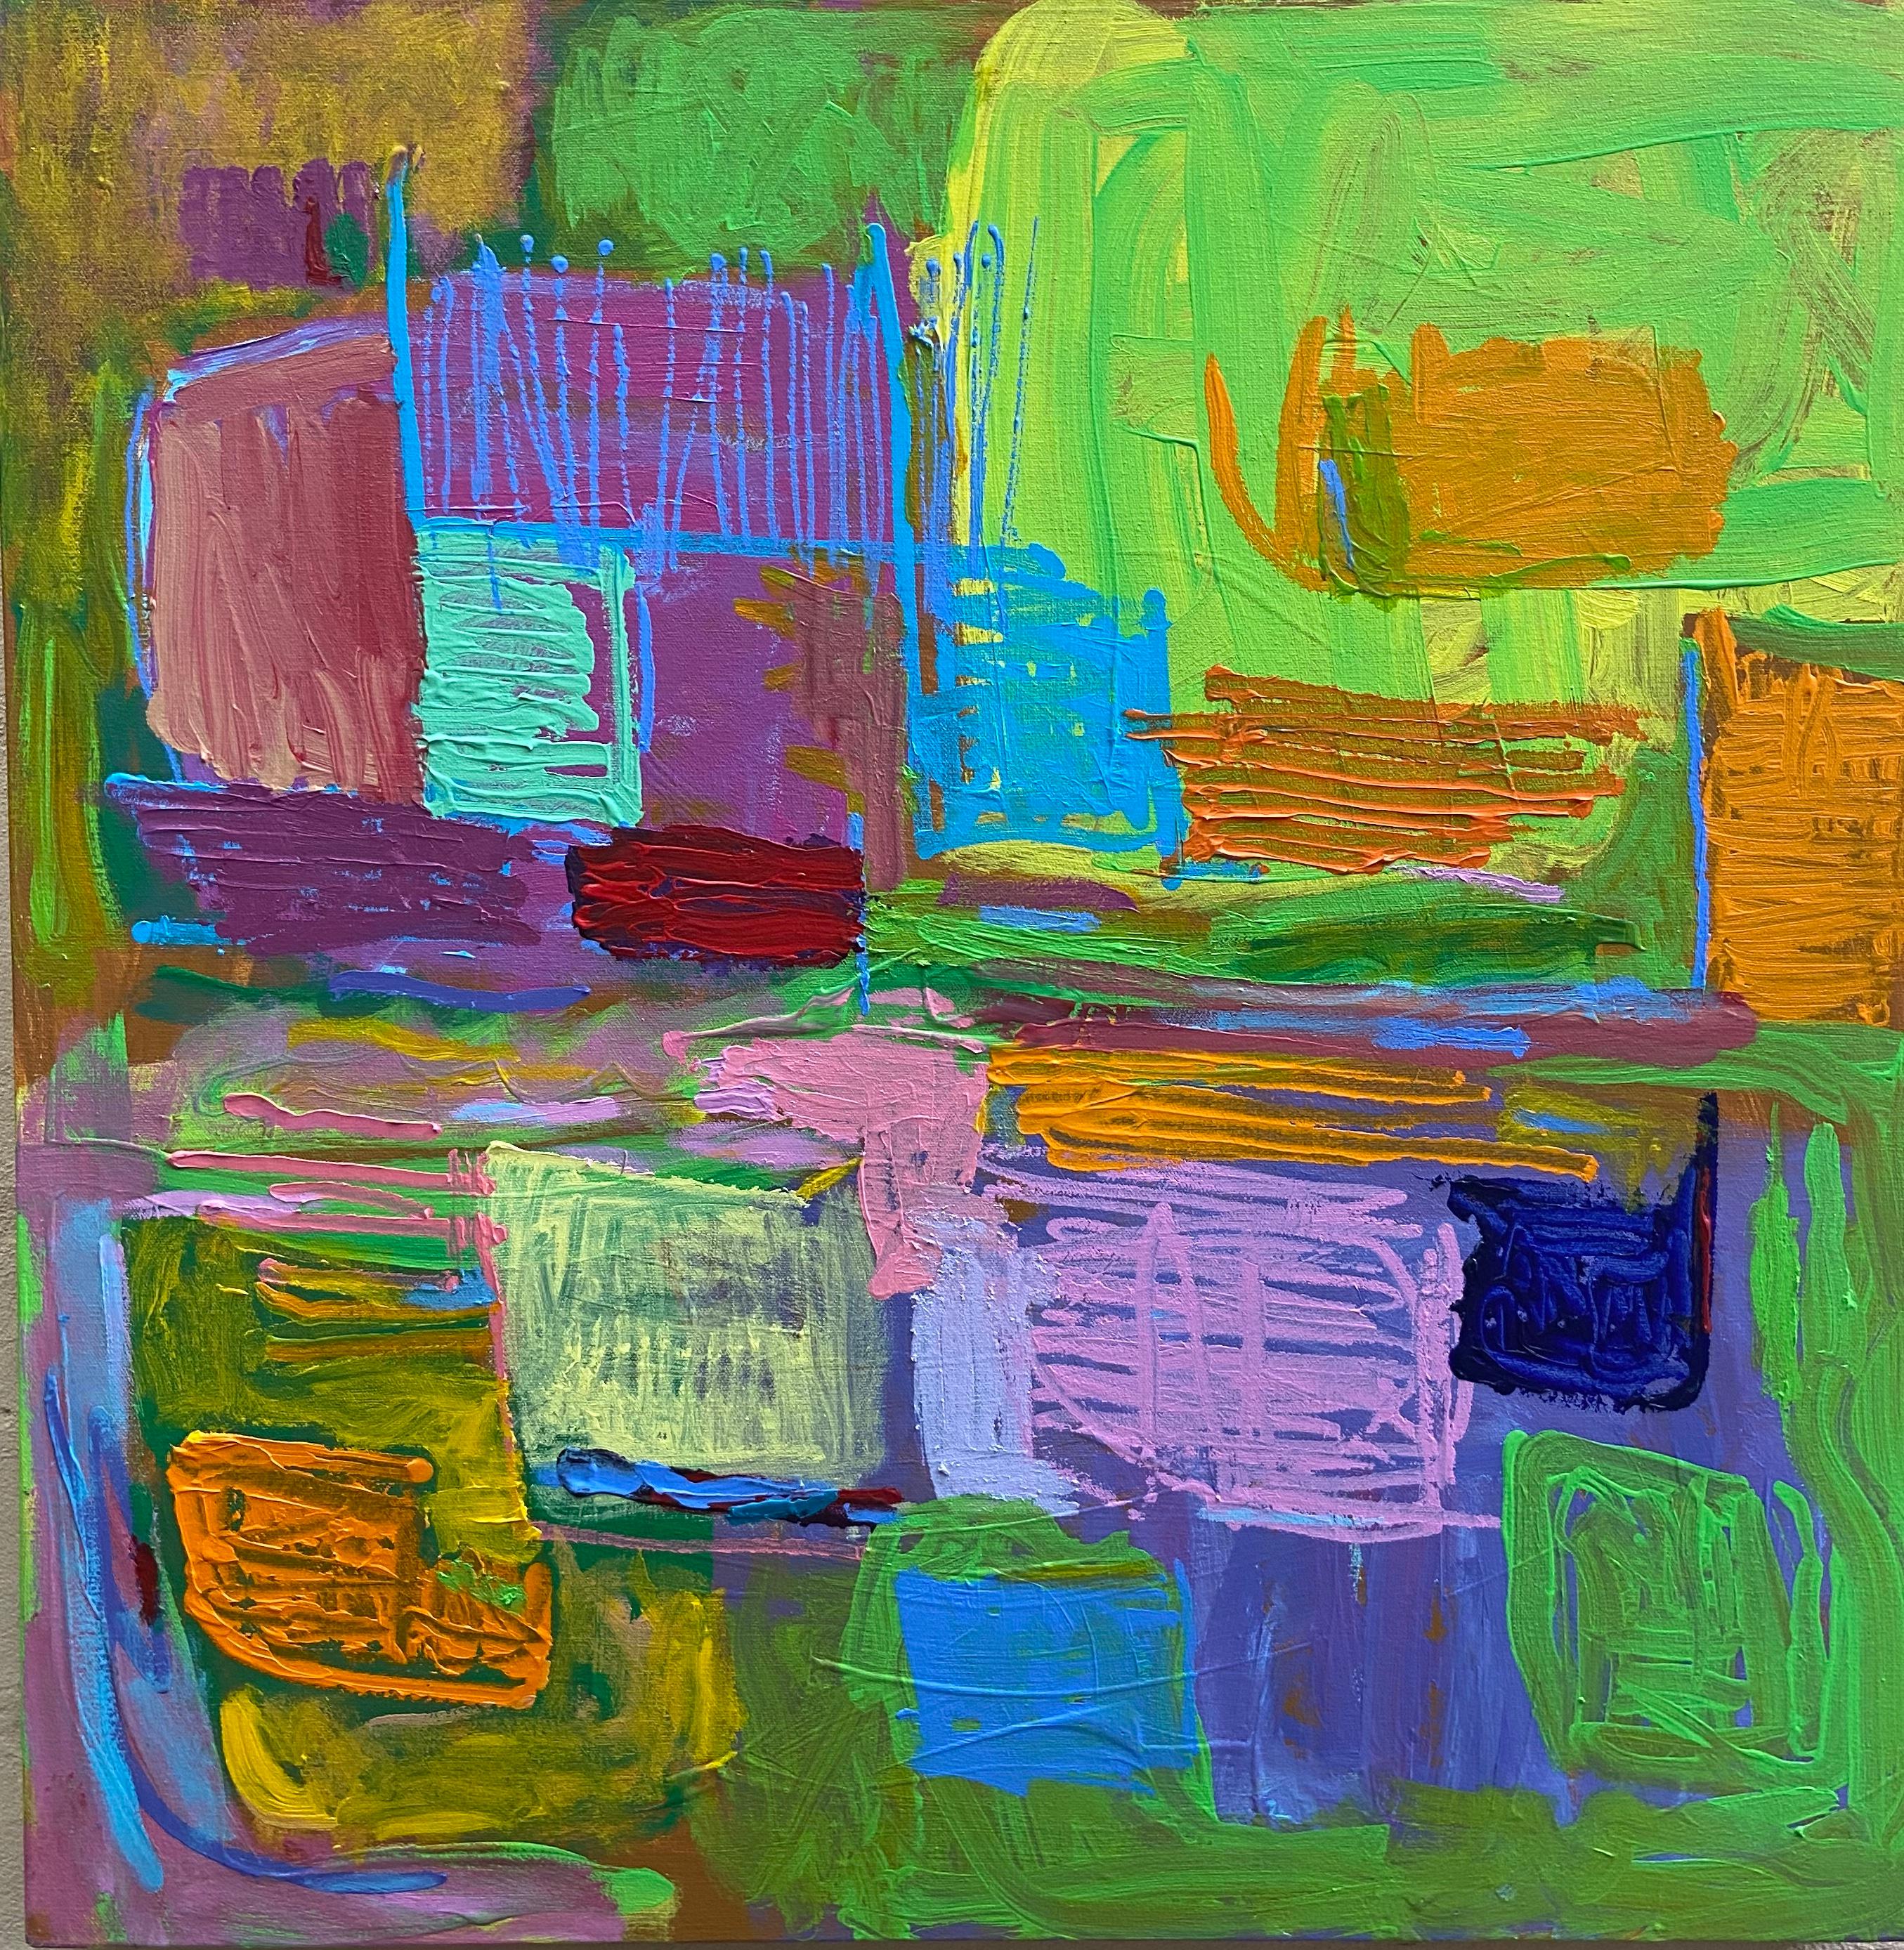 John Blee Abstract Painting - "Lodi Charbagh" Color extravaganza of floating squares lime green lavender blue